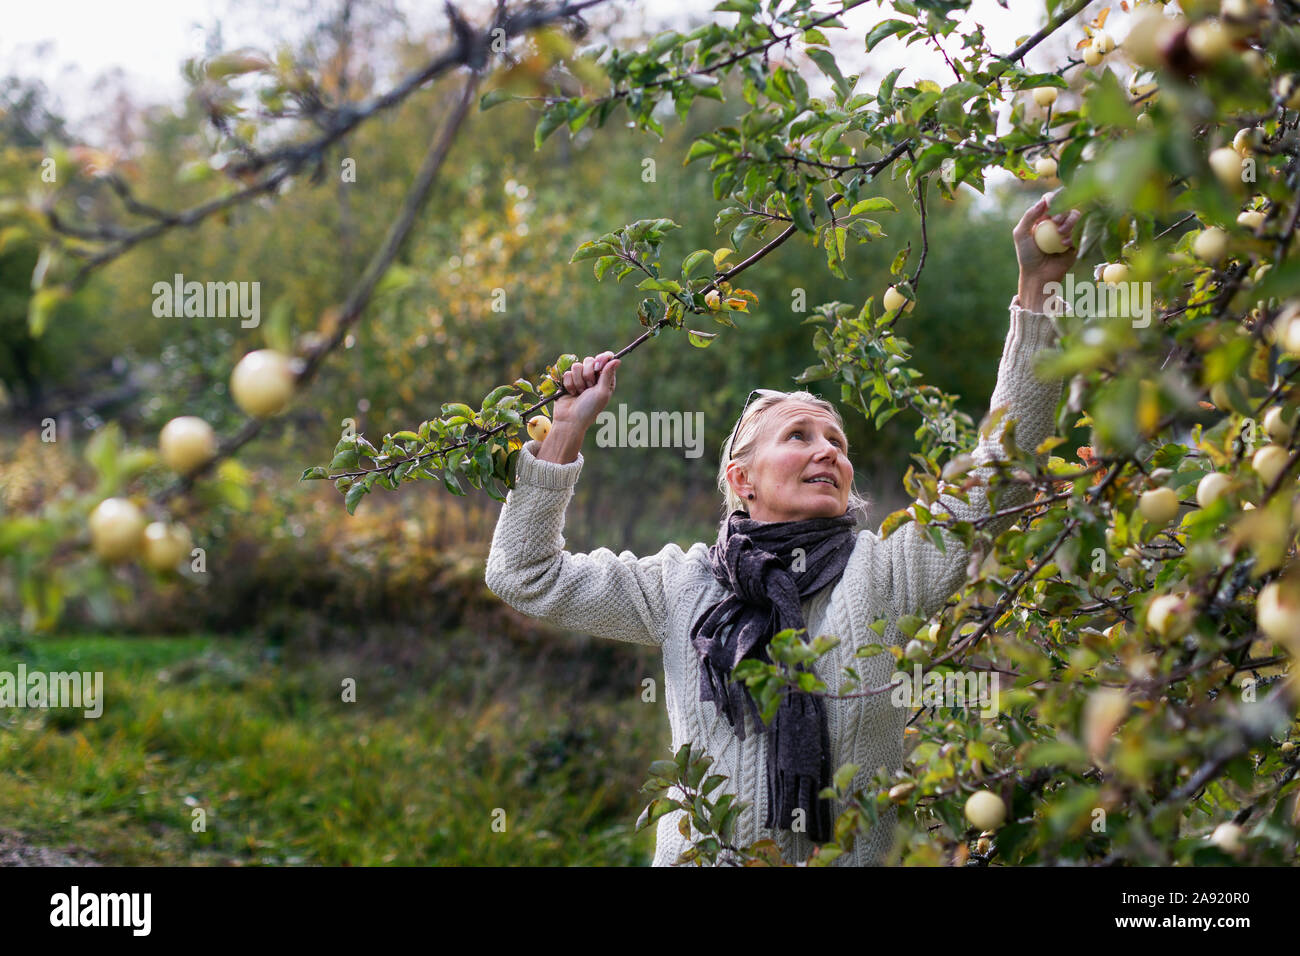 Woman picking apples Banque D'Images